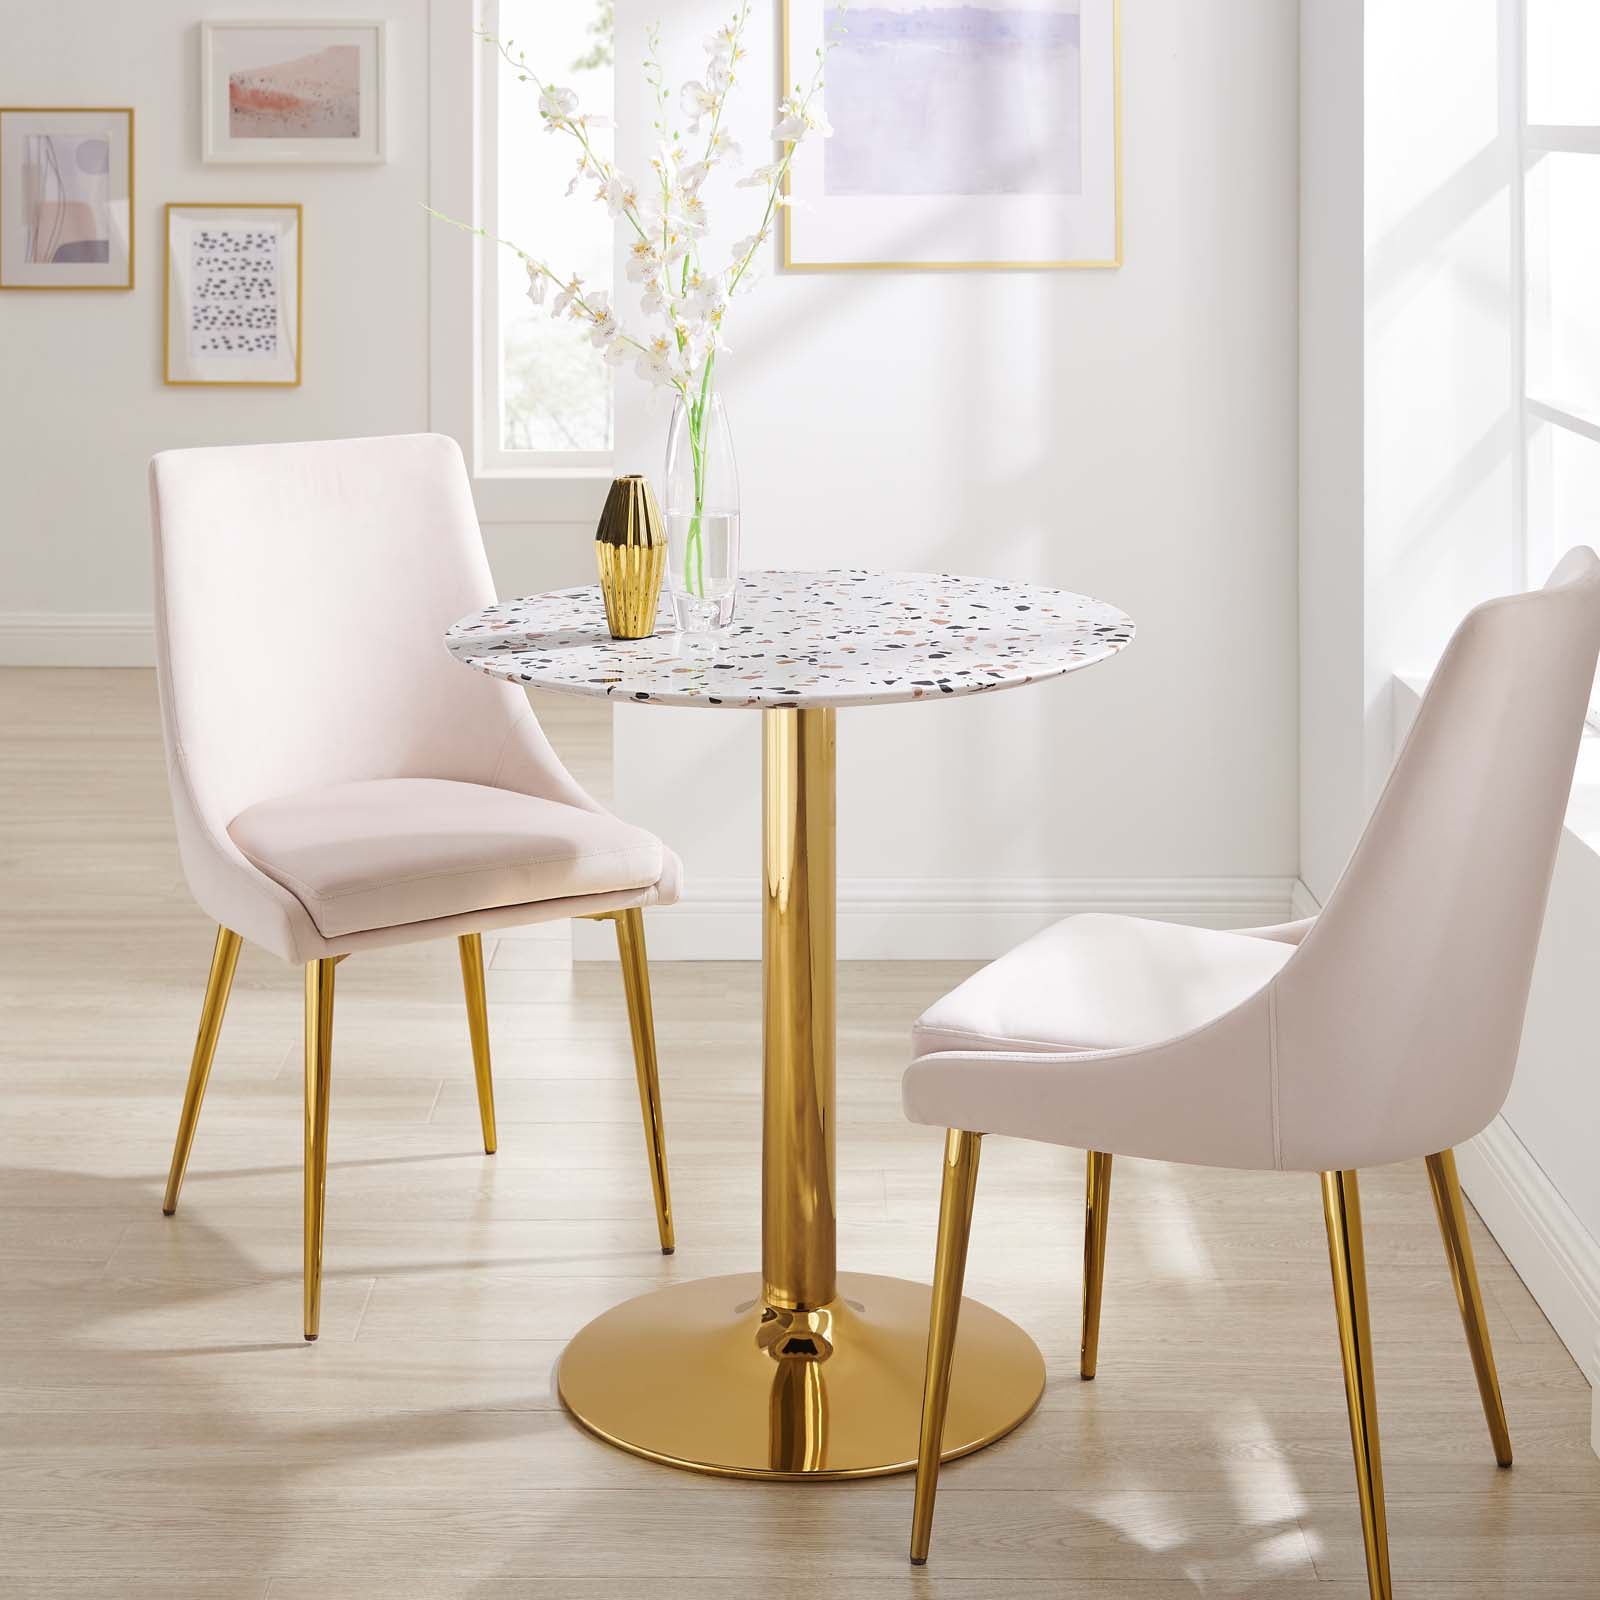 Verne 28" Round Terrazzo Dining Table - East Shore Modern Home Furnishings